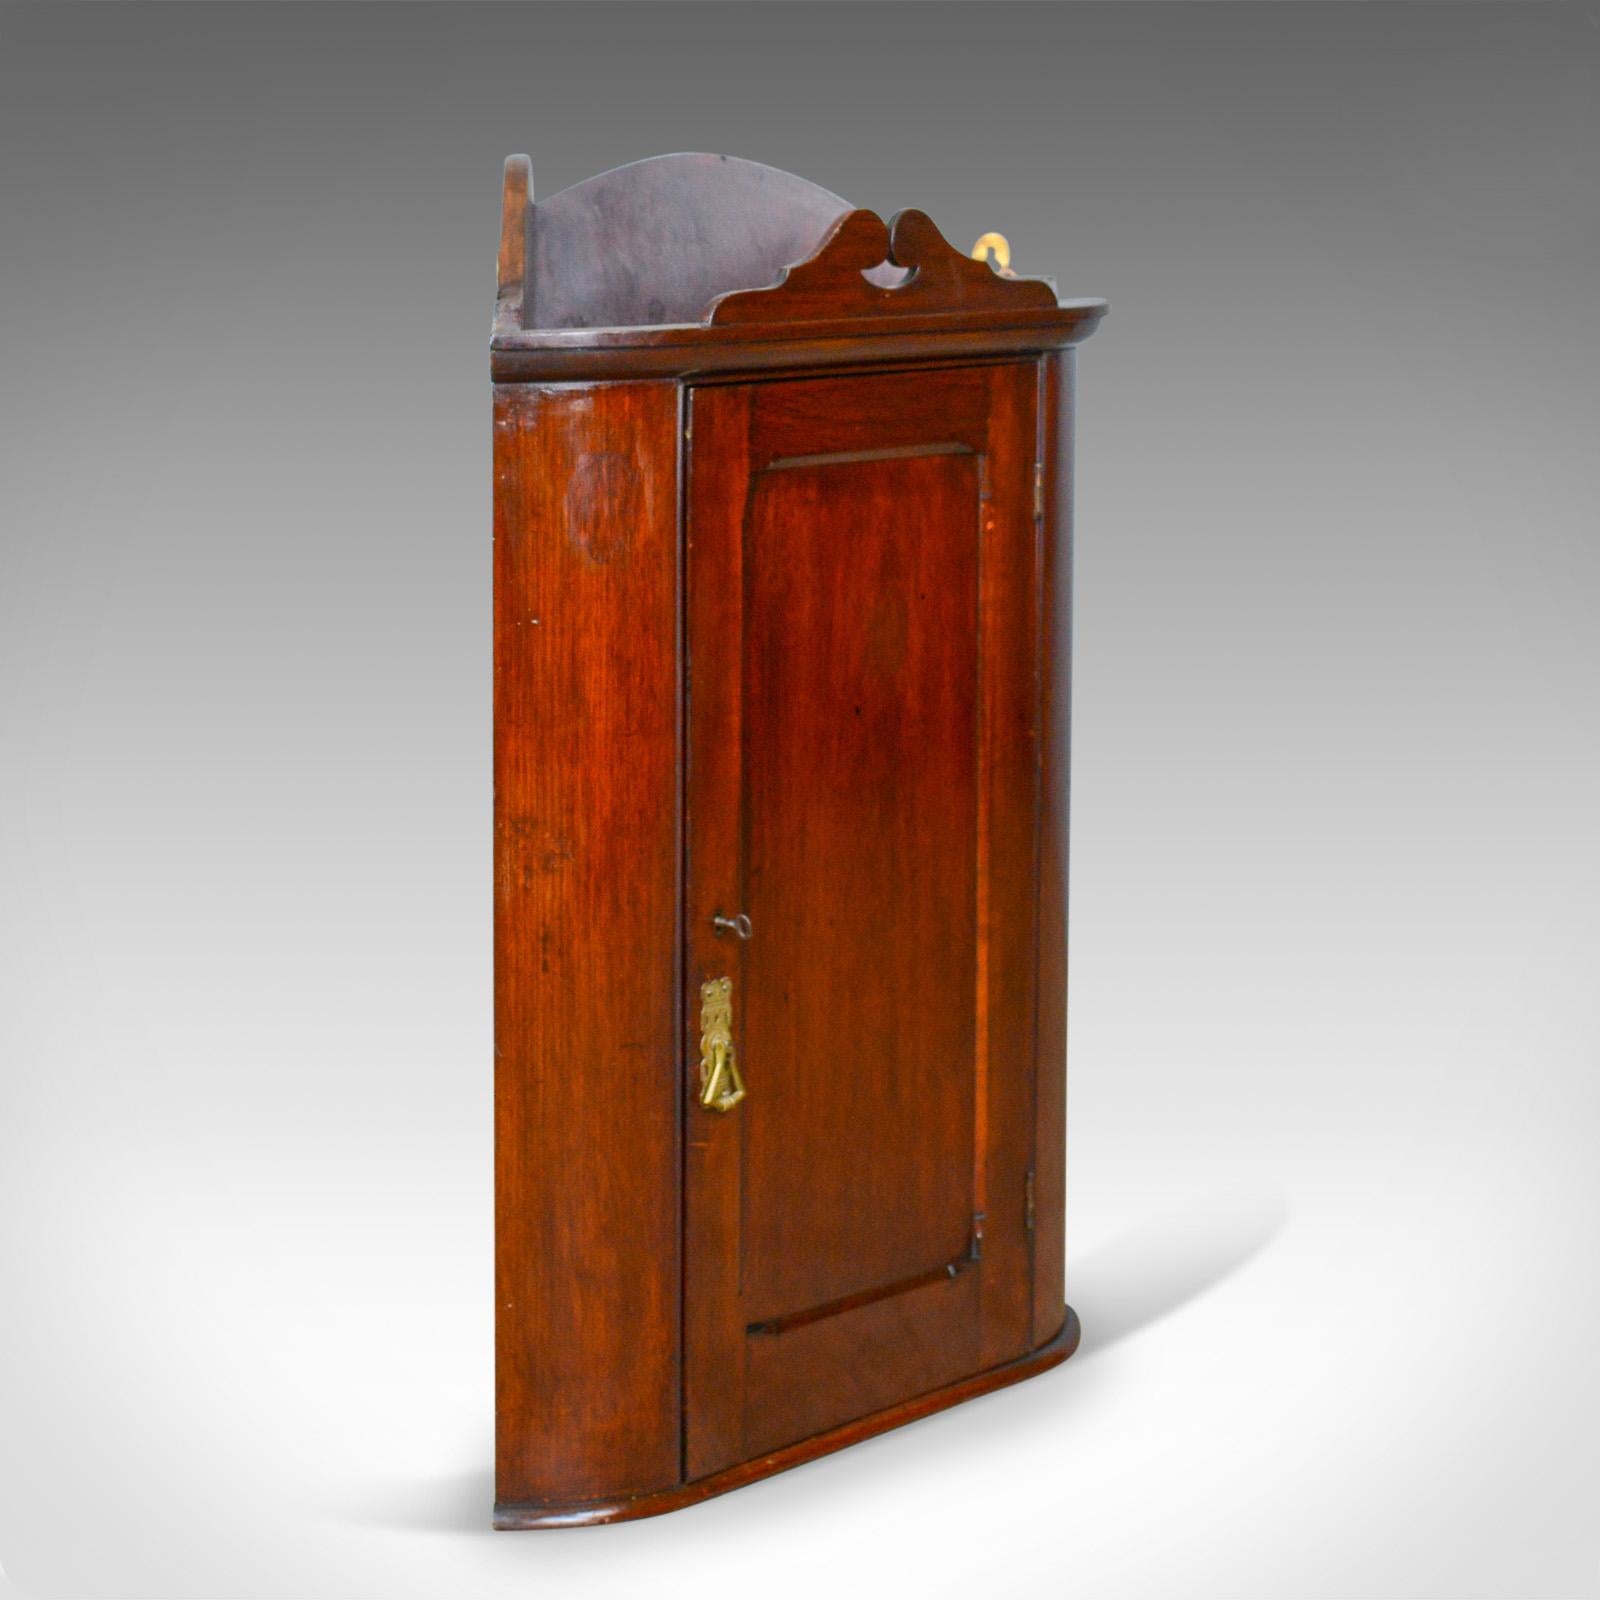 This is a small antique corner cabinet, an English, walnut, wall hanging cupboard dating to the turn of the century, circa 1900.

Attractive cabinet in smaller proportions than most
English walnut glows in the wax polished finish
Grain interest